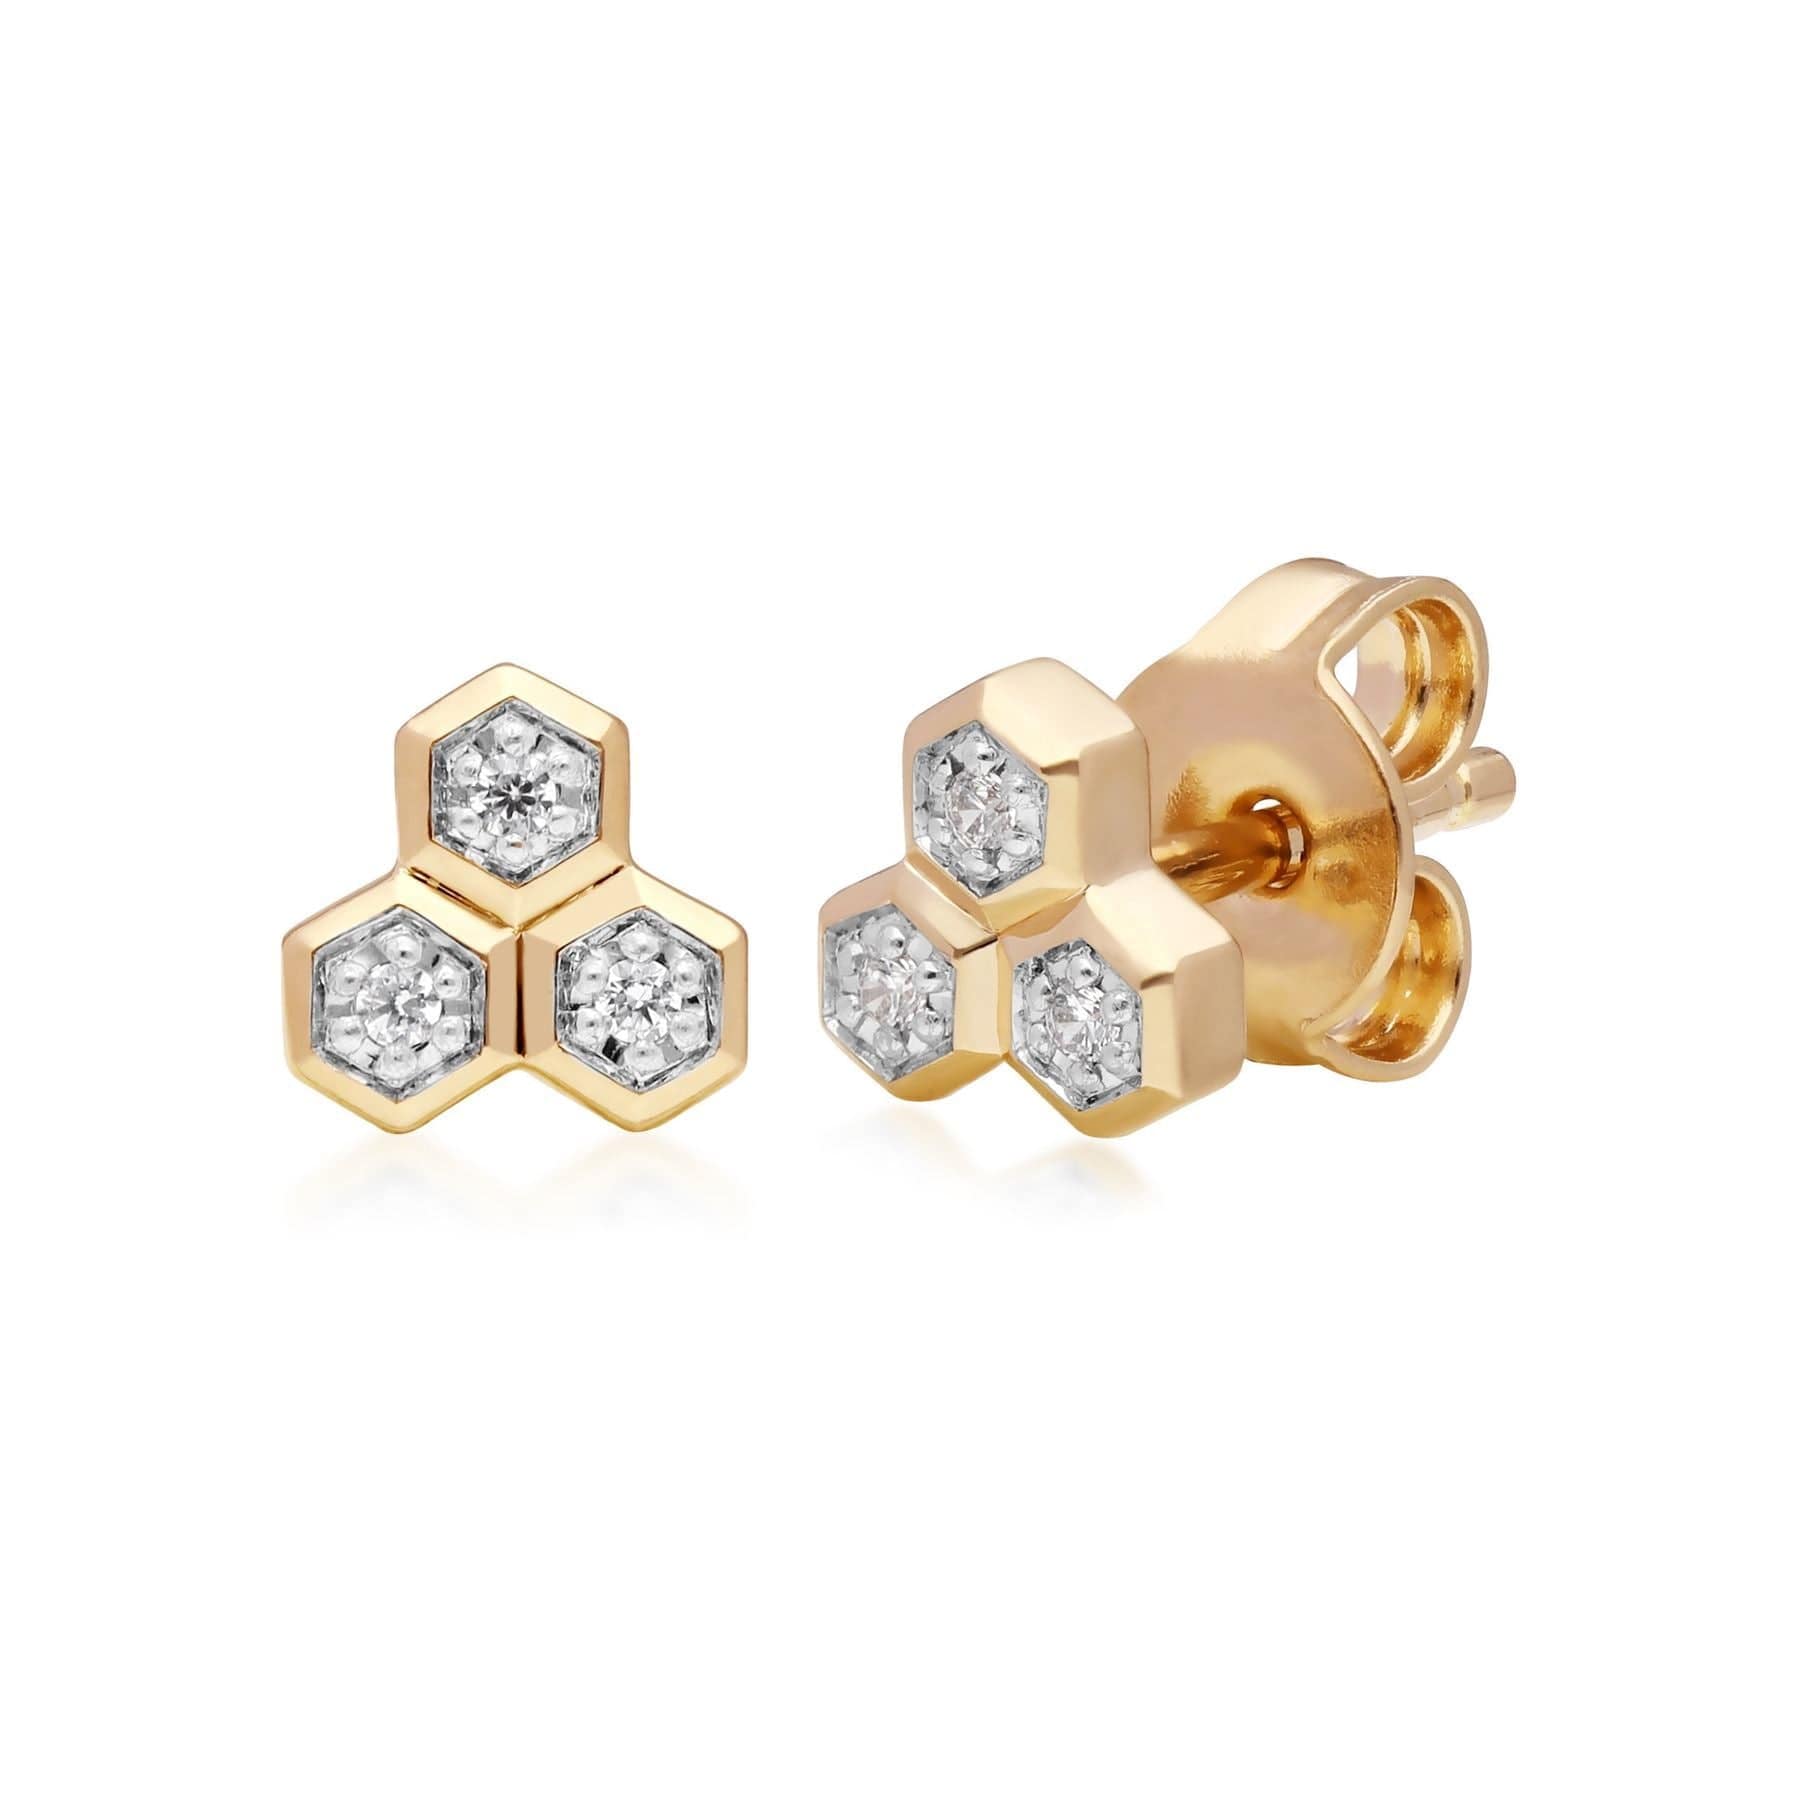 191E0398019-191R0907019 Diamond Trilogy Ring & Stud Earring Set in 9ct Yellow Gold 2